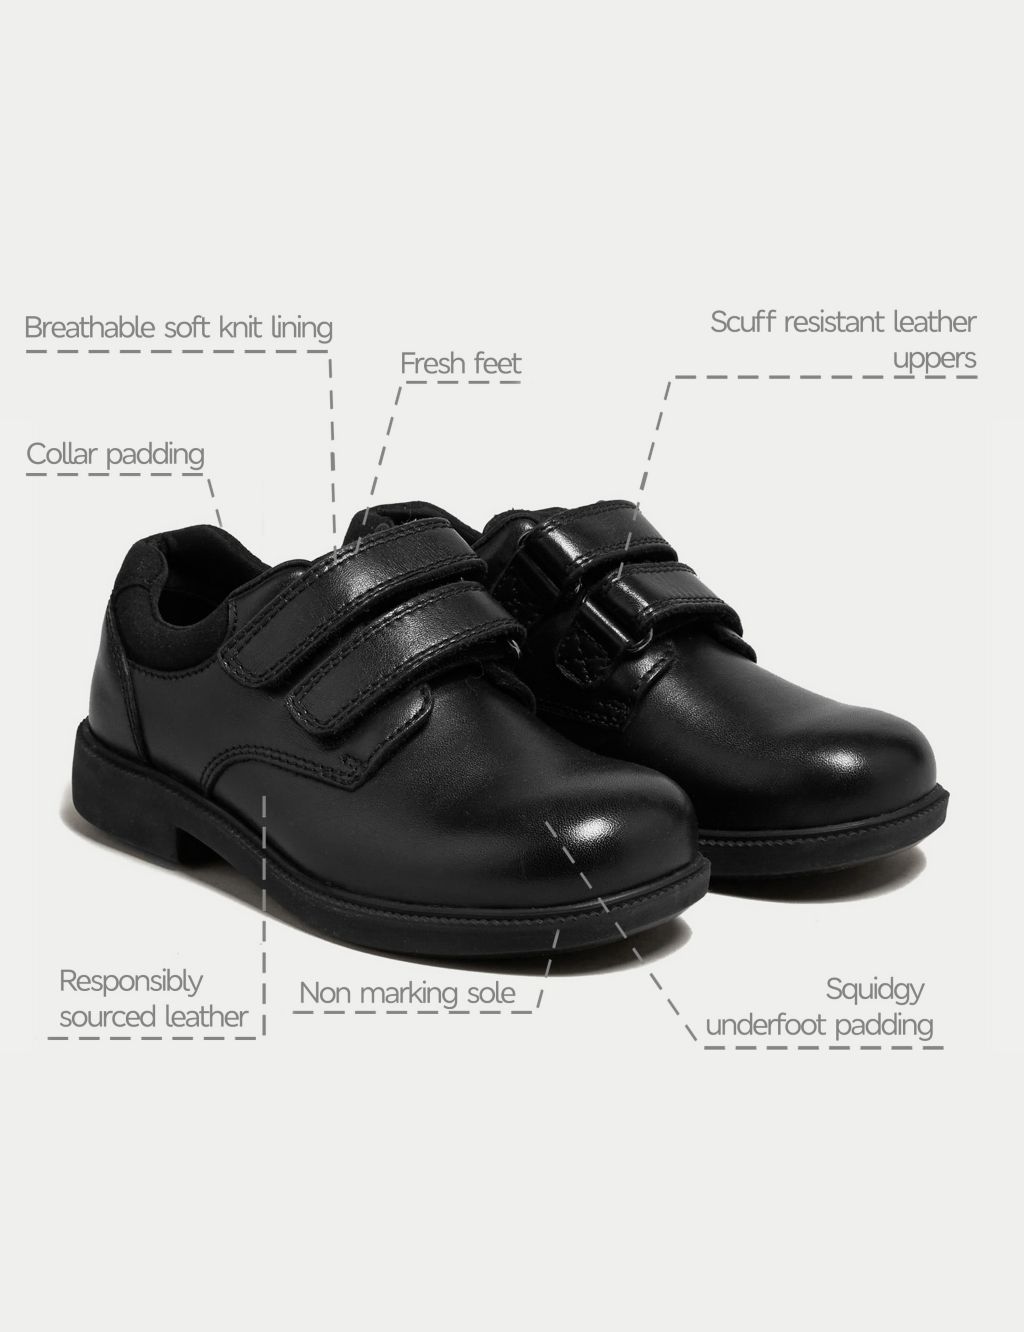 Kids’ Leather Riptape School Shoes (8 Small - 1 Large) image 6